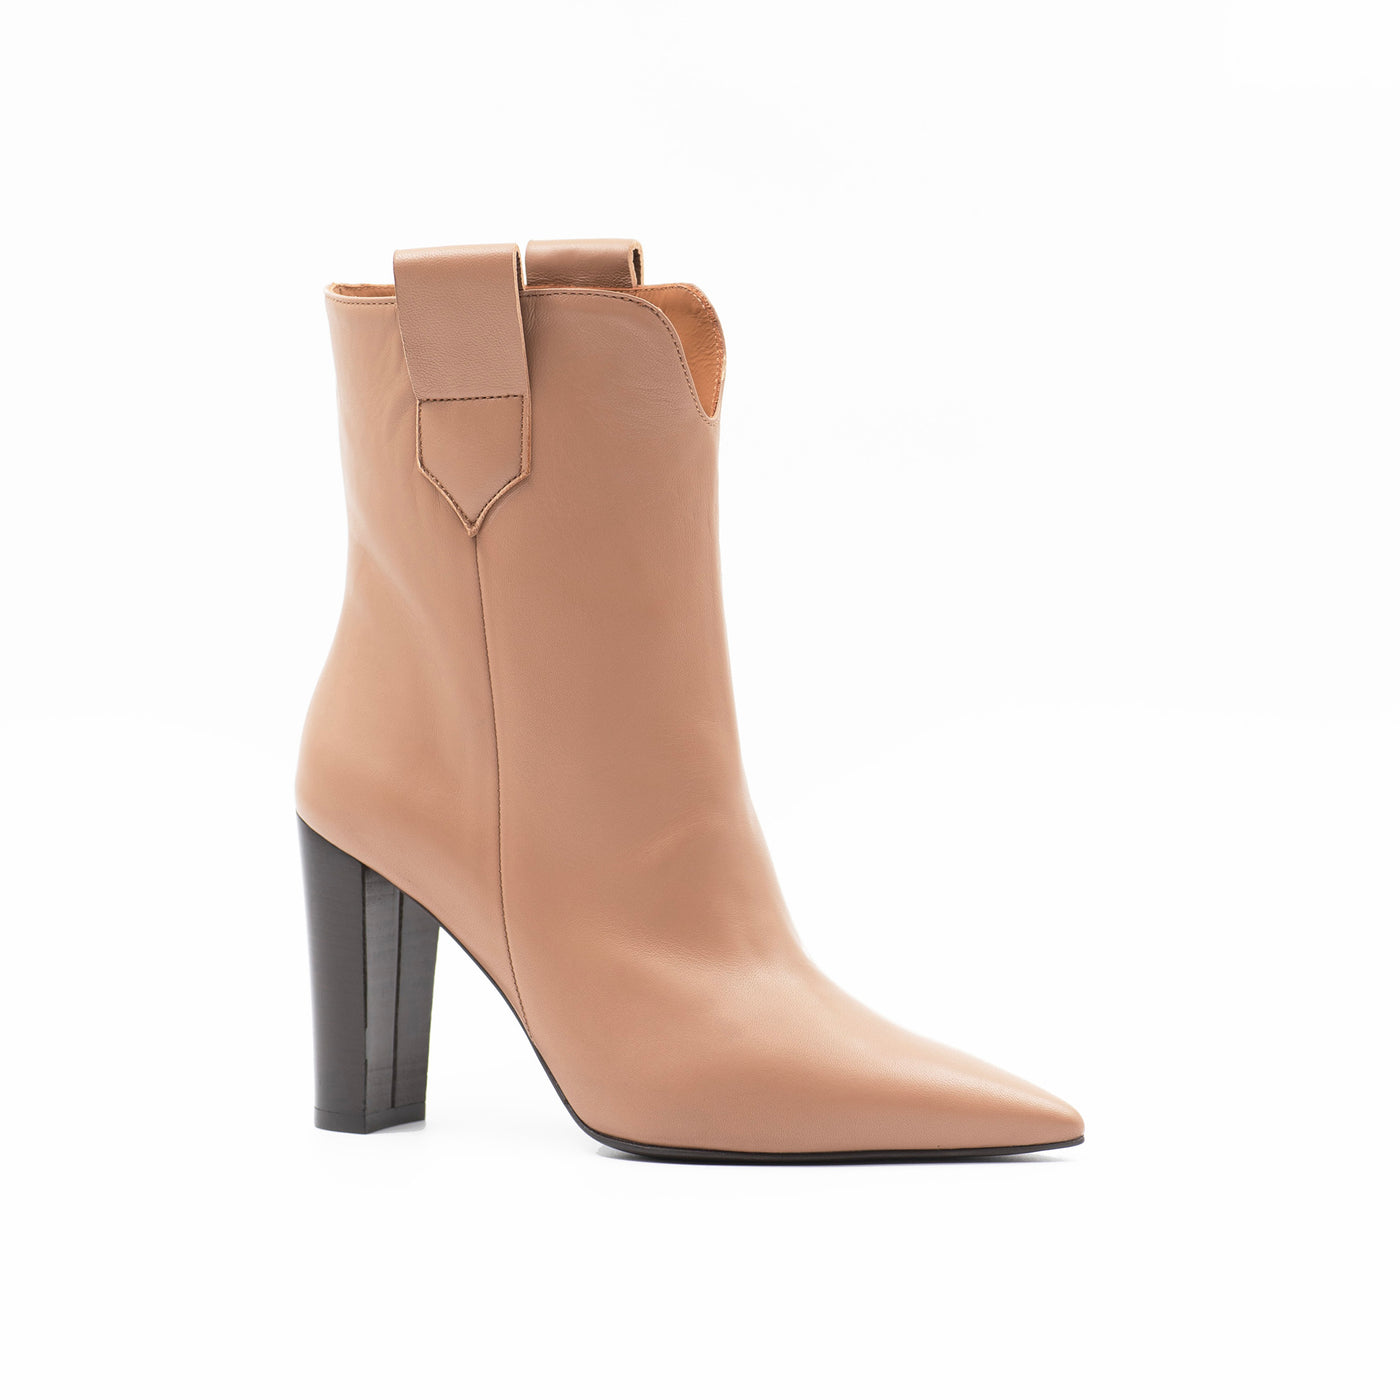 Straight ankle boots with block heel in beige leather